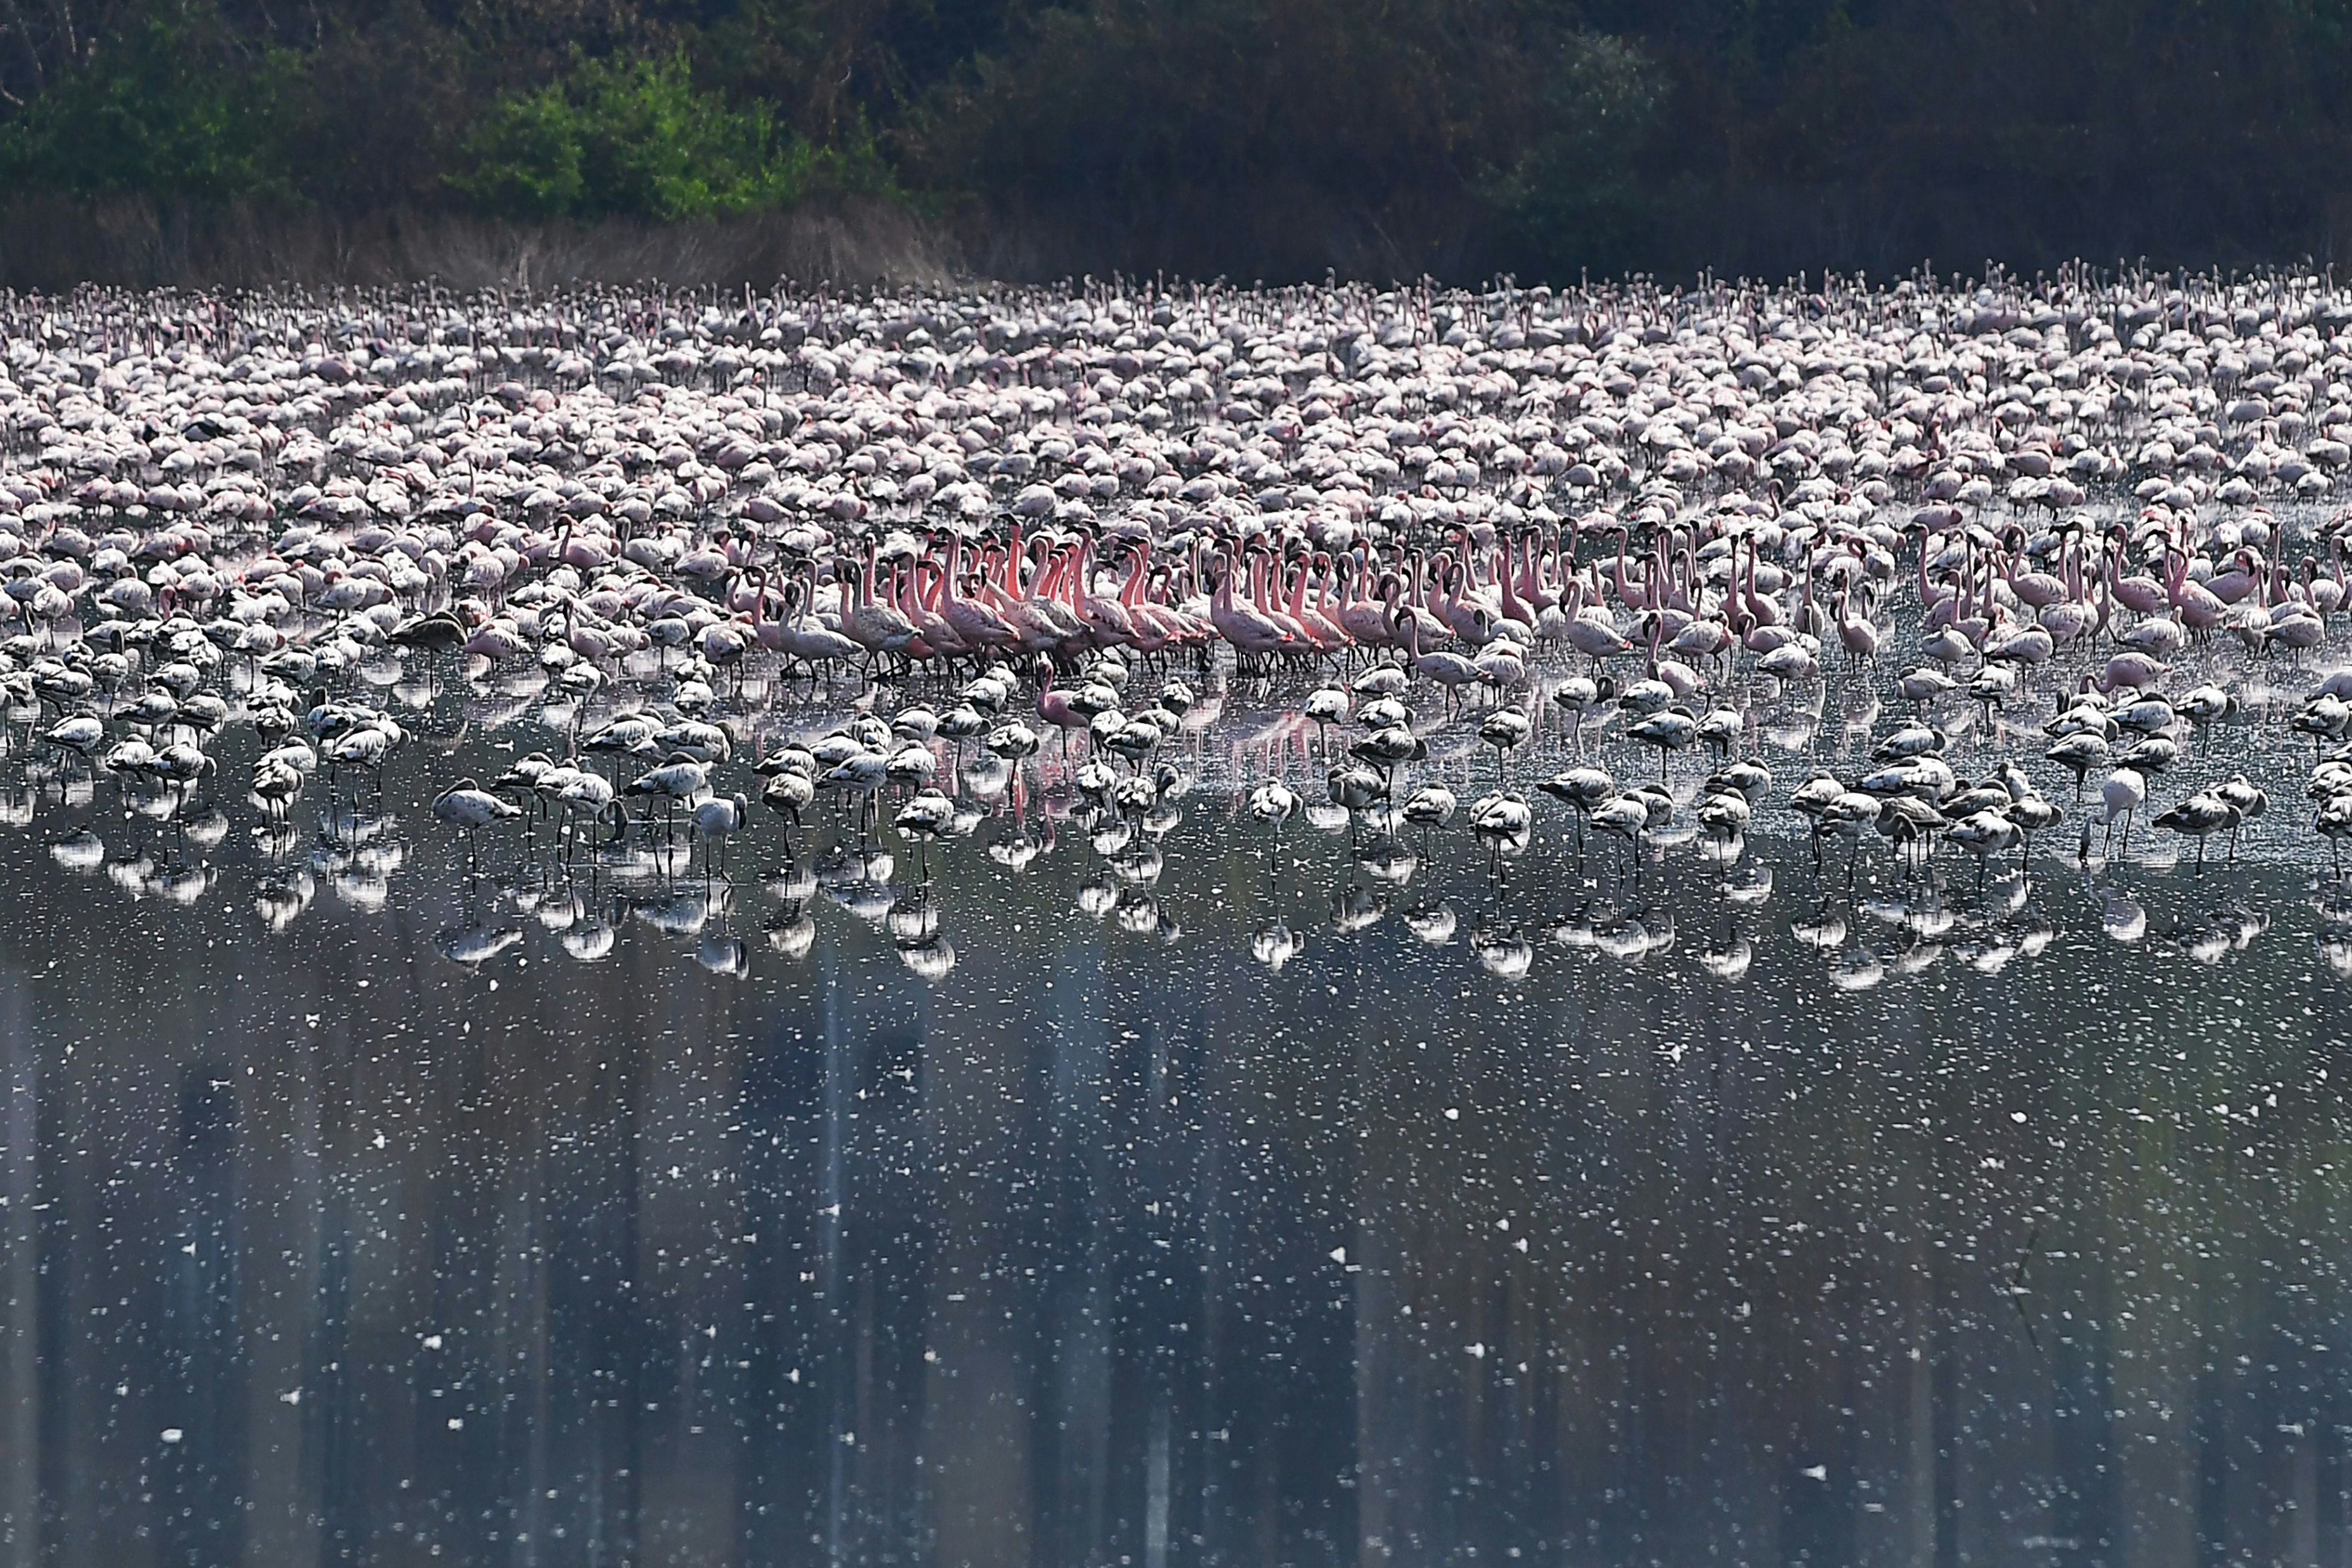 Flamingos are seen in a pond in India during a government-imposed nationwide